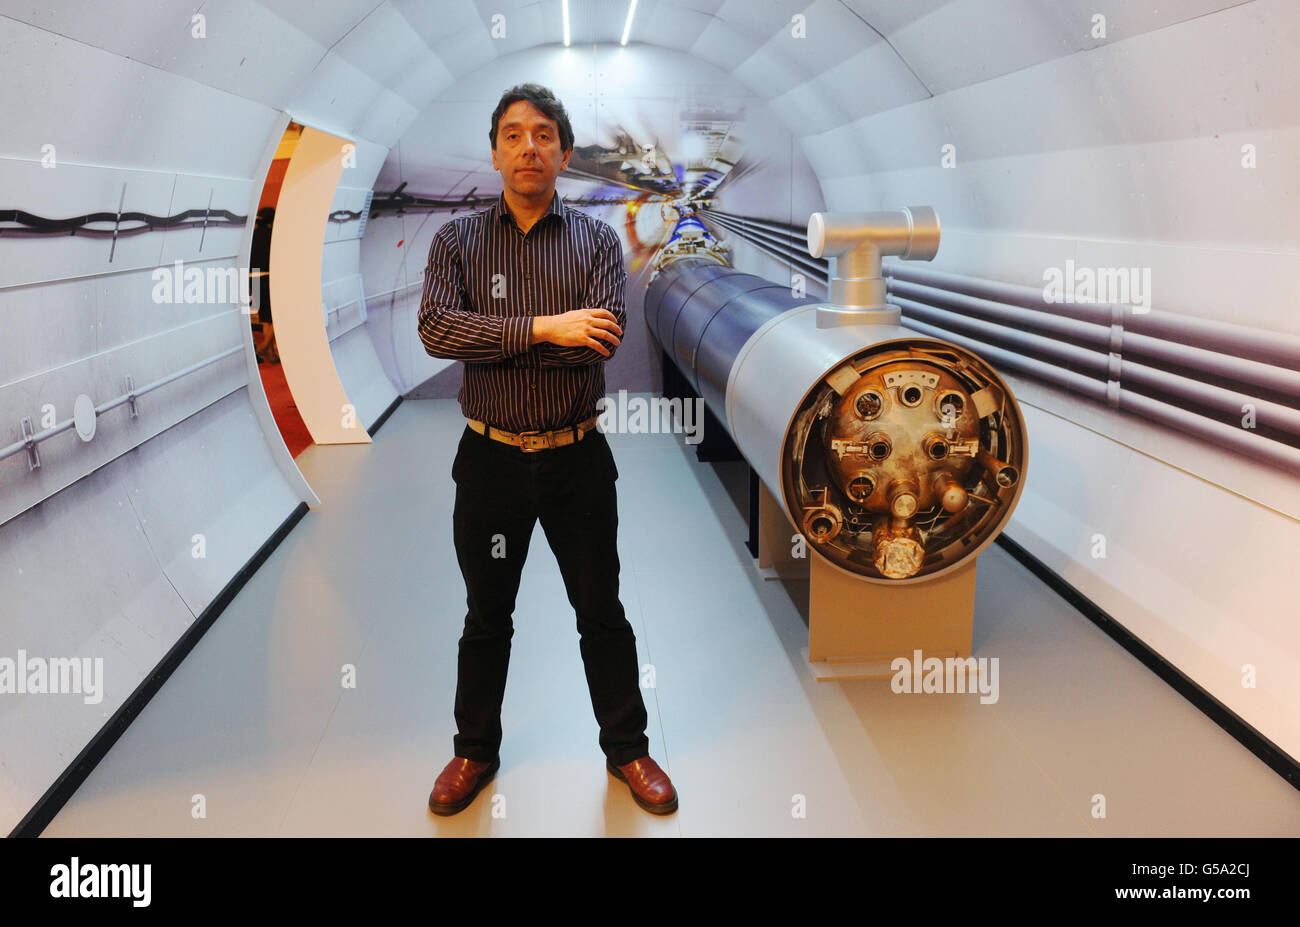 University College London Professor John Butterworth, a scientist on the Atlas experiment, whose findings are being announced today, stands with a model of the Large Hadron Collider in London. Stock Photo